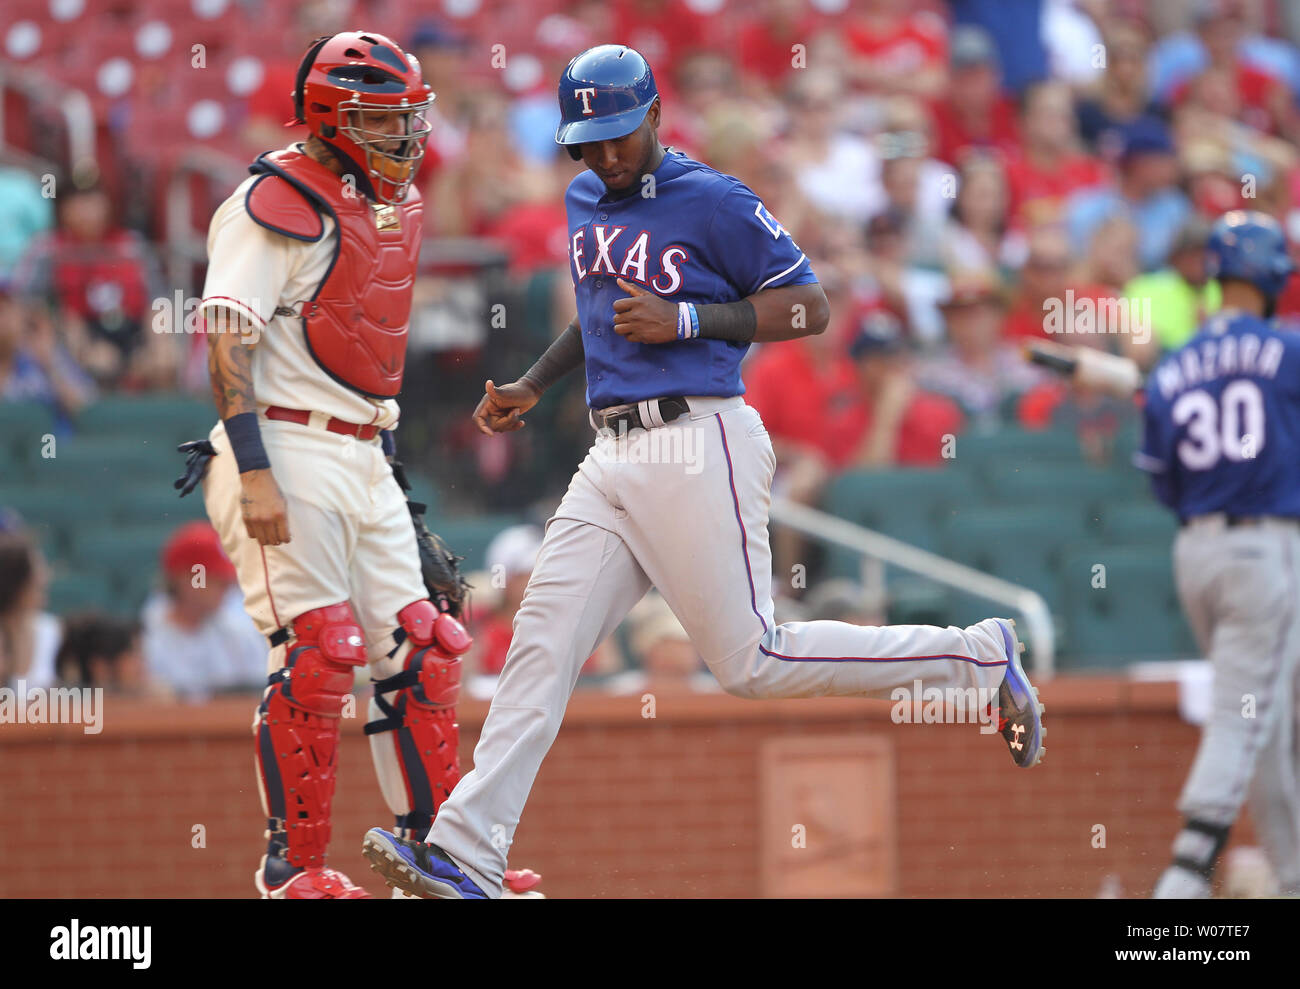 St. Louis Cardinals catcher Yadier Molina watches as Texas Rangers Jurickson Profarat cross home plate with the go ahead run in the ninth inning at Busch Stadium in St. Louis on June 18, 2016. Texas won the game 4-3.    Photo by Bill Greenblatt/UPI Stock Photo